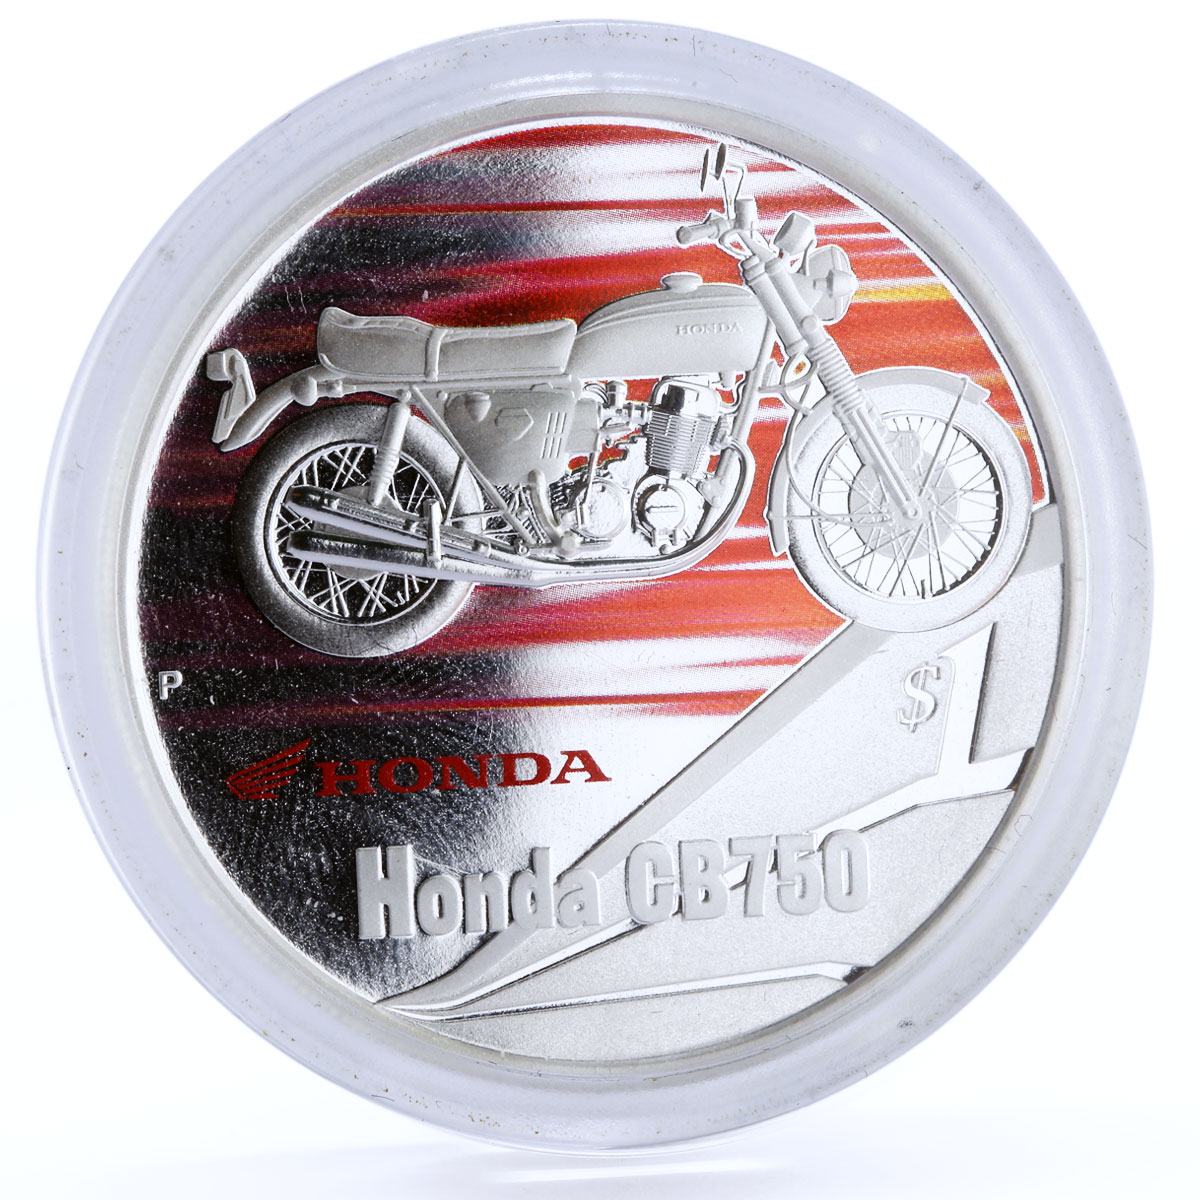 Tuvalu set of 5 coins Classic Motorbikes colored silver coins 2008